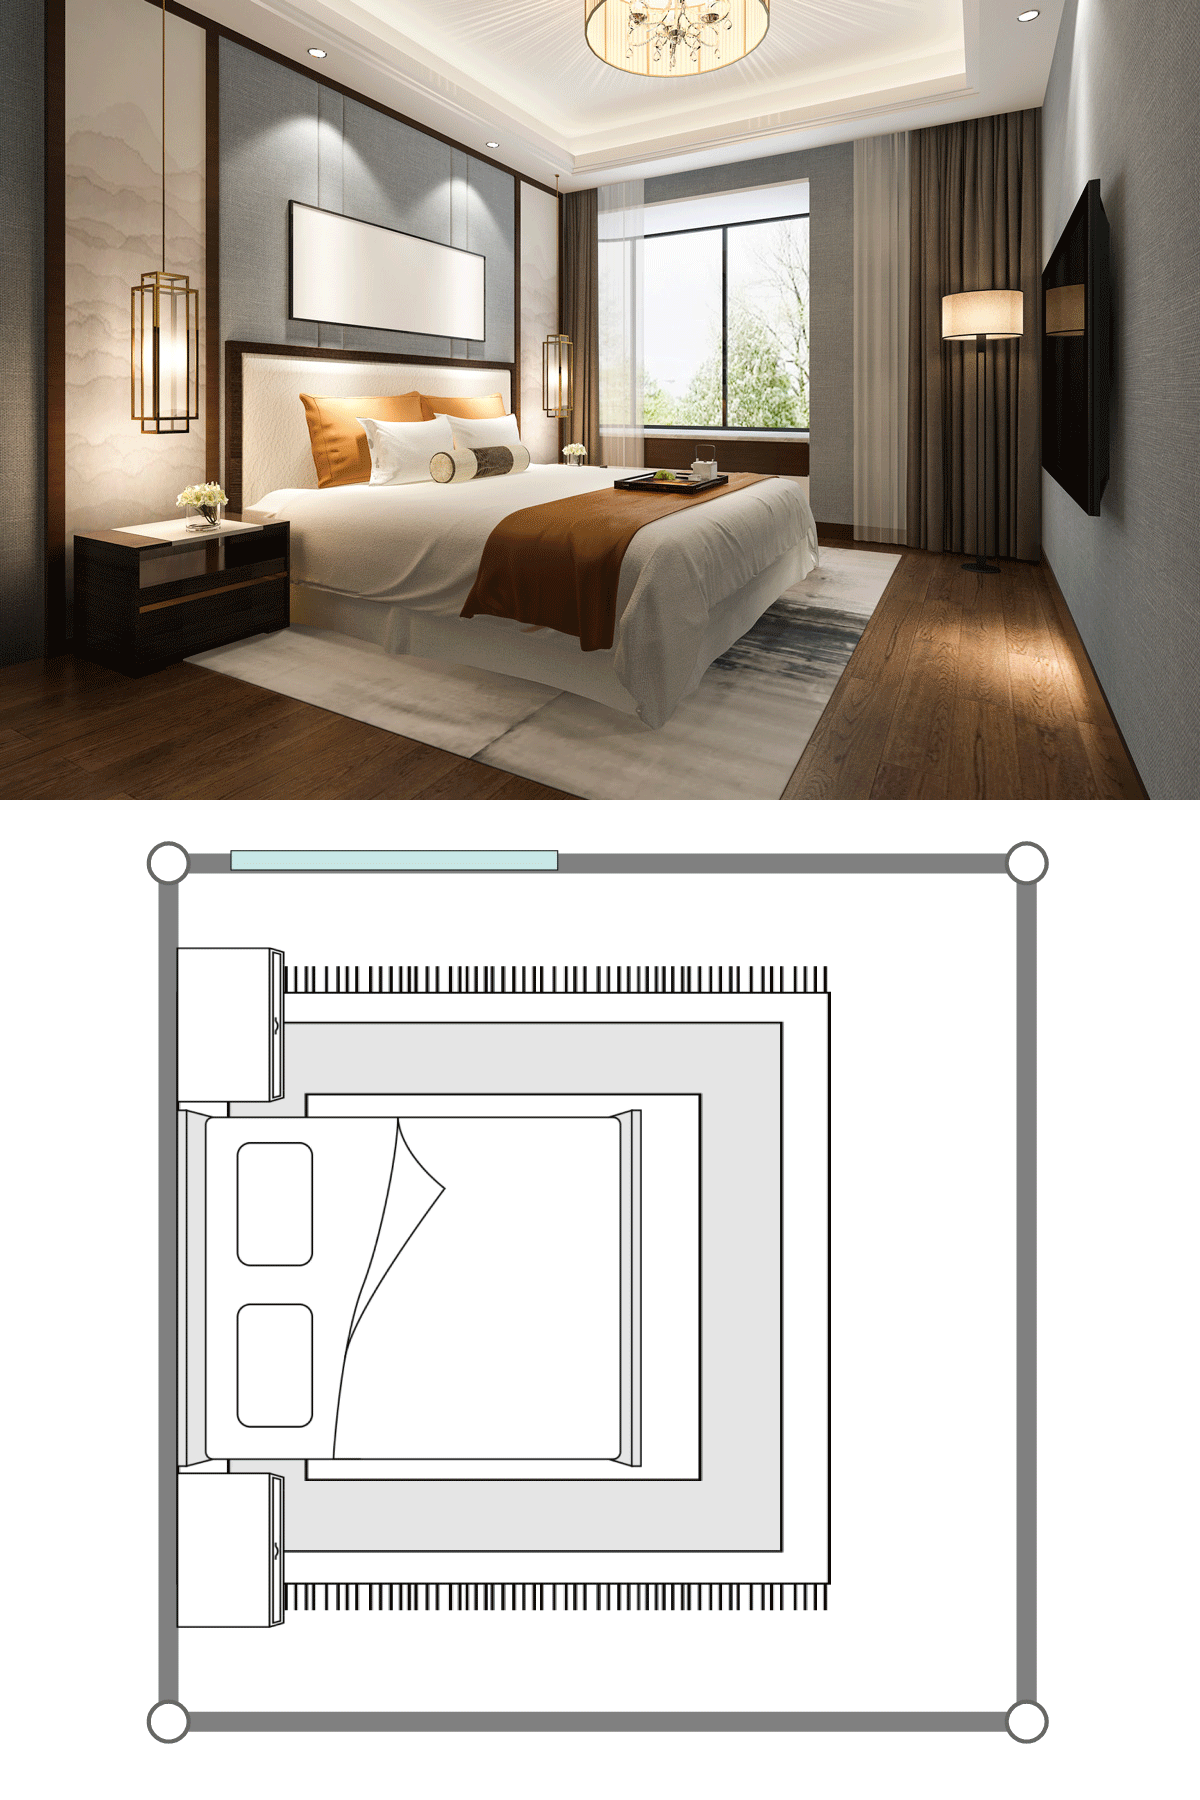 Interior of a luxurious modern bedroom with white beddings and orange beddings and dangling lamps